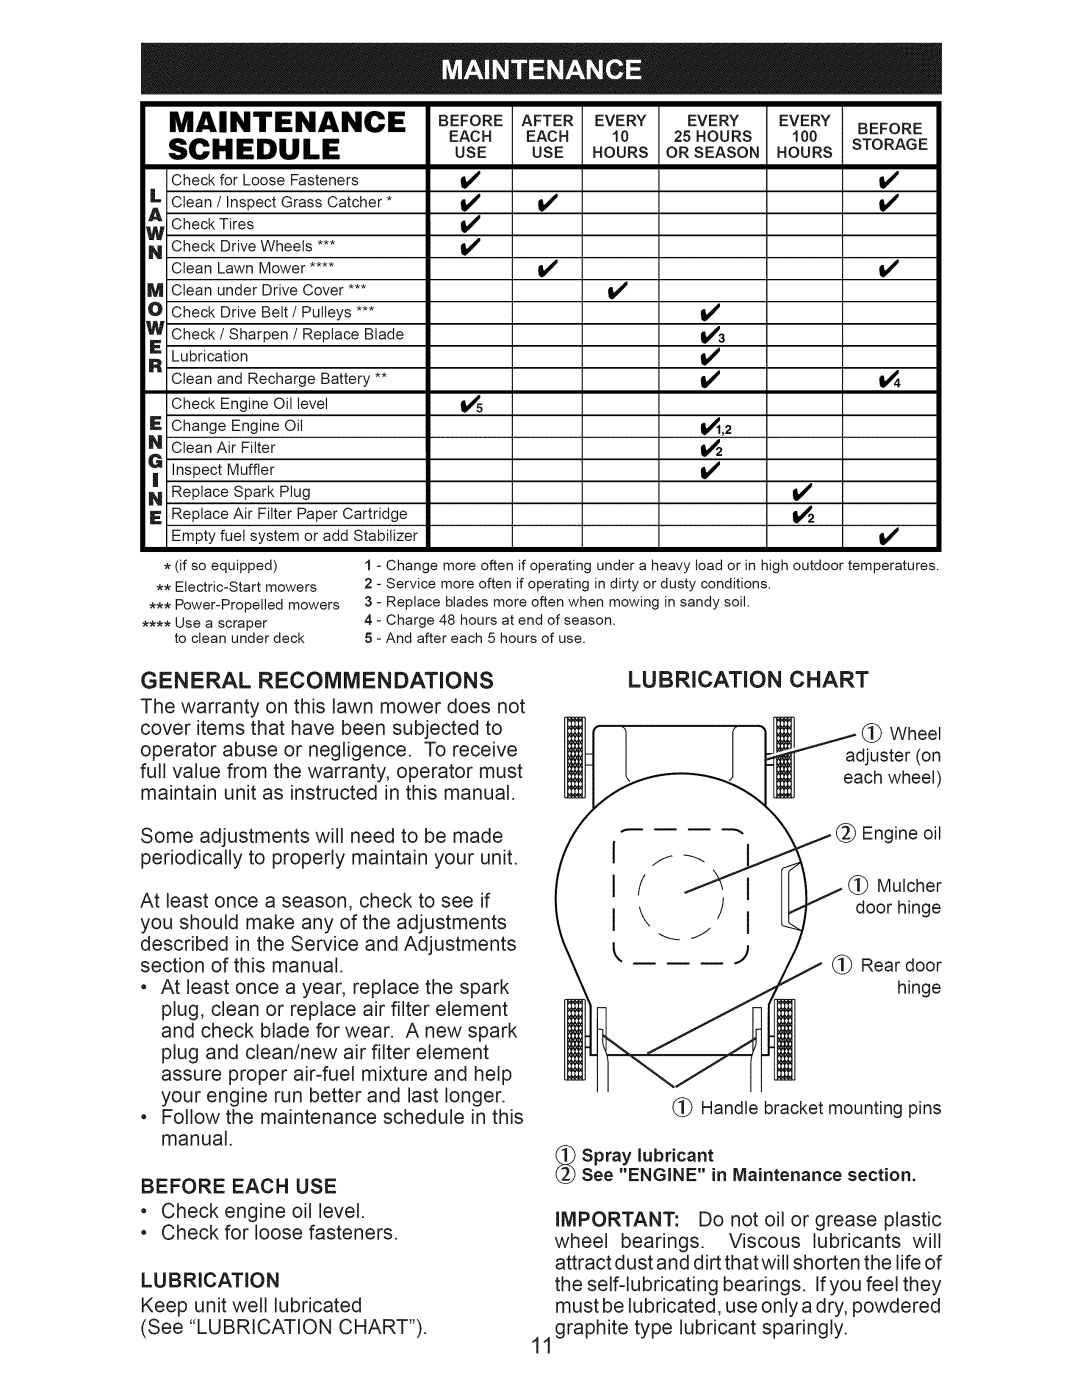 Craftsman 917.389010 manual Maintenance, Schedule, Use Hours 